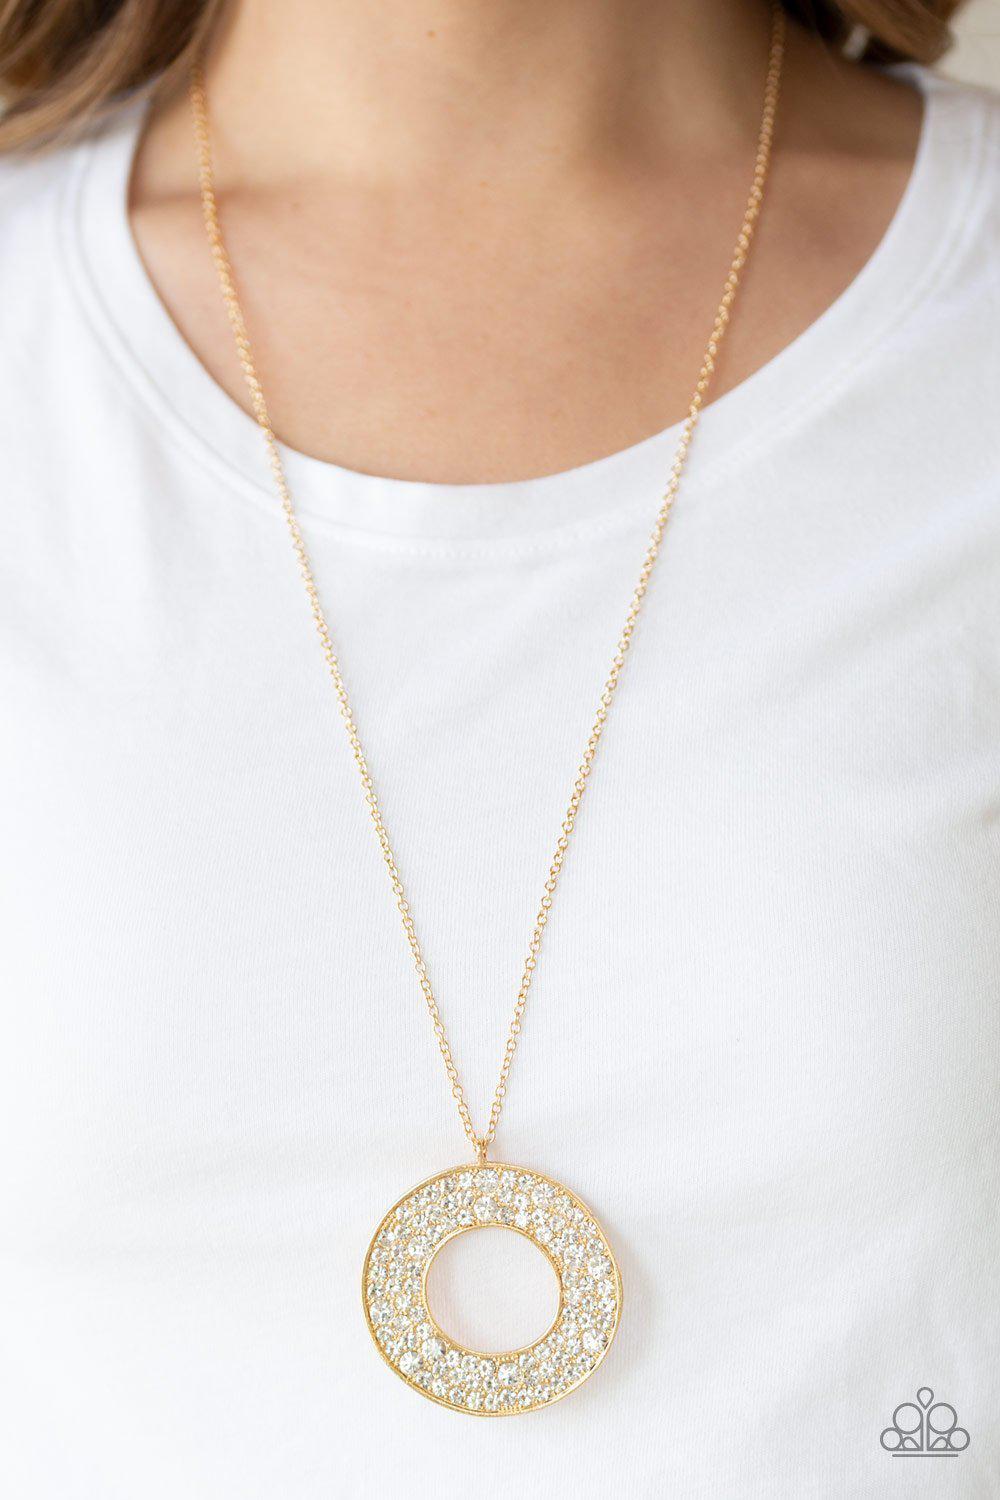 Bad HEIR Day Gold and White Rhinestone Necklace - Paparazzi Accessories-CarasShop.com - $5 Jewelry by Cara Jewels